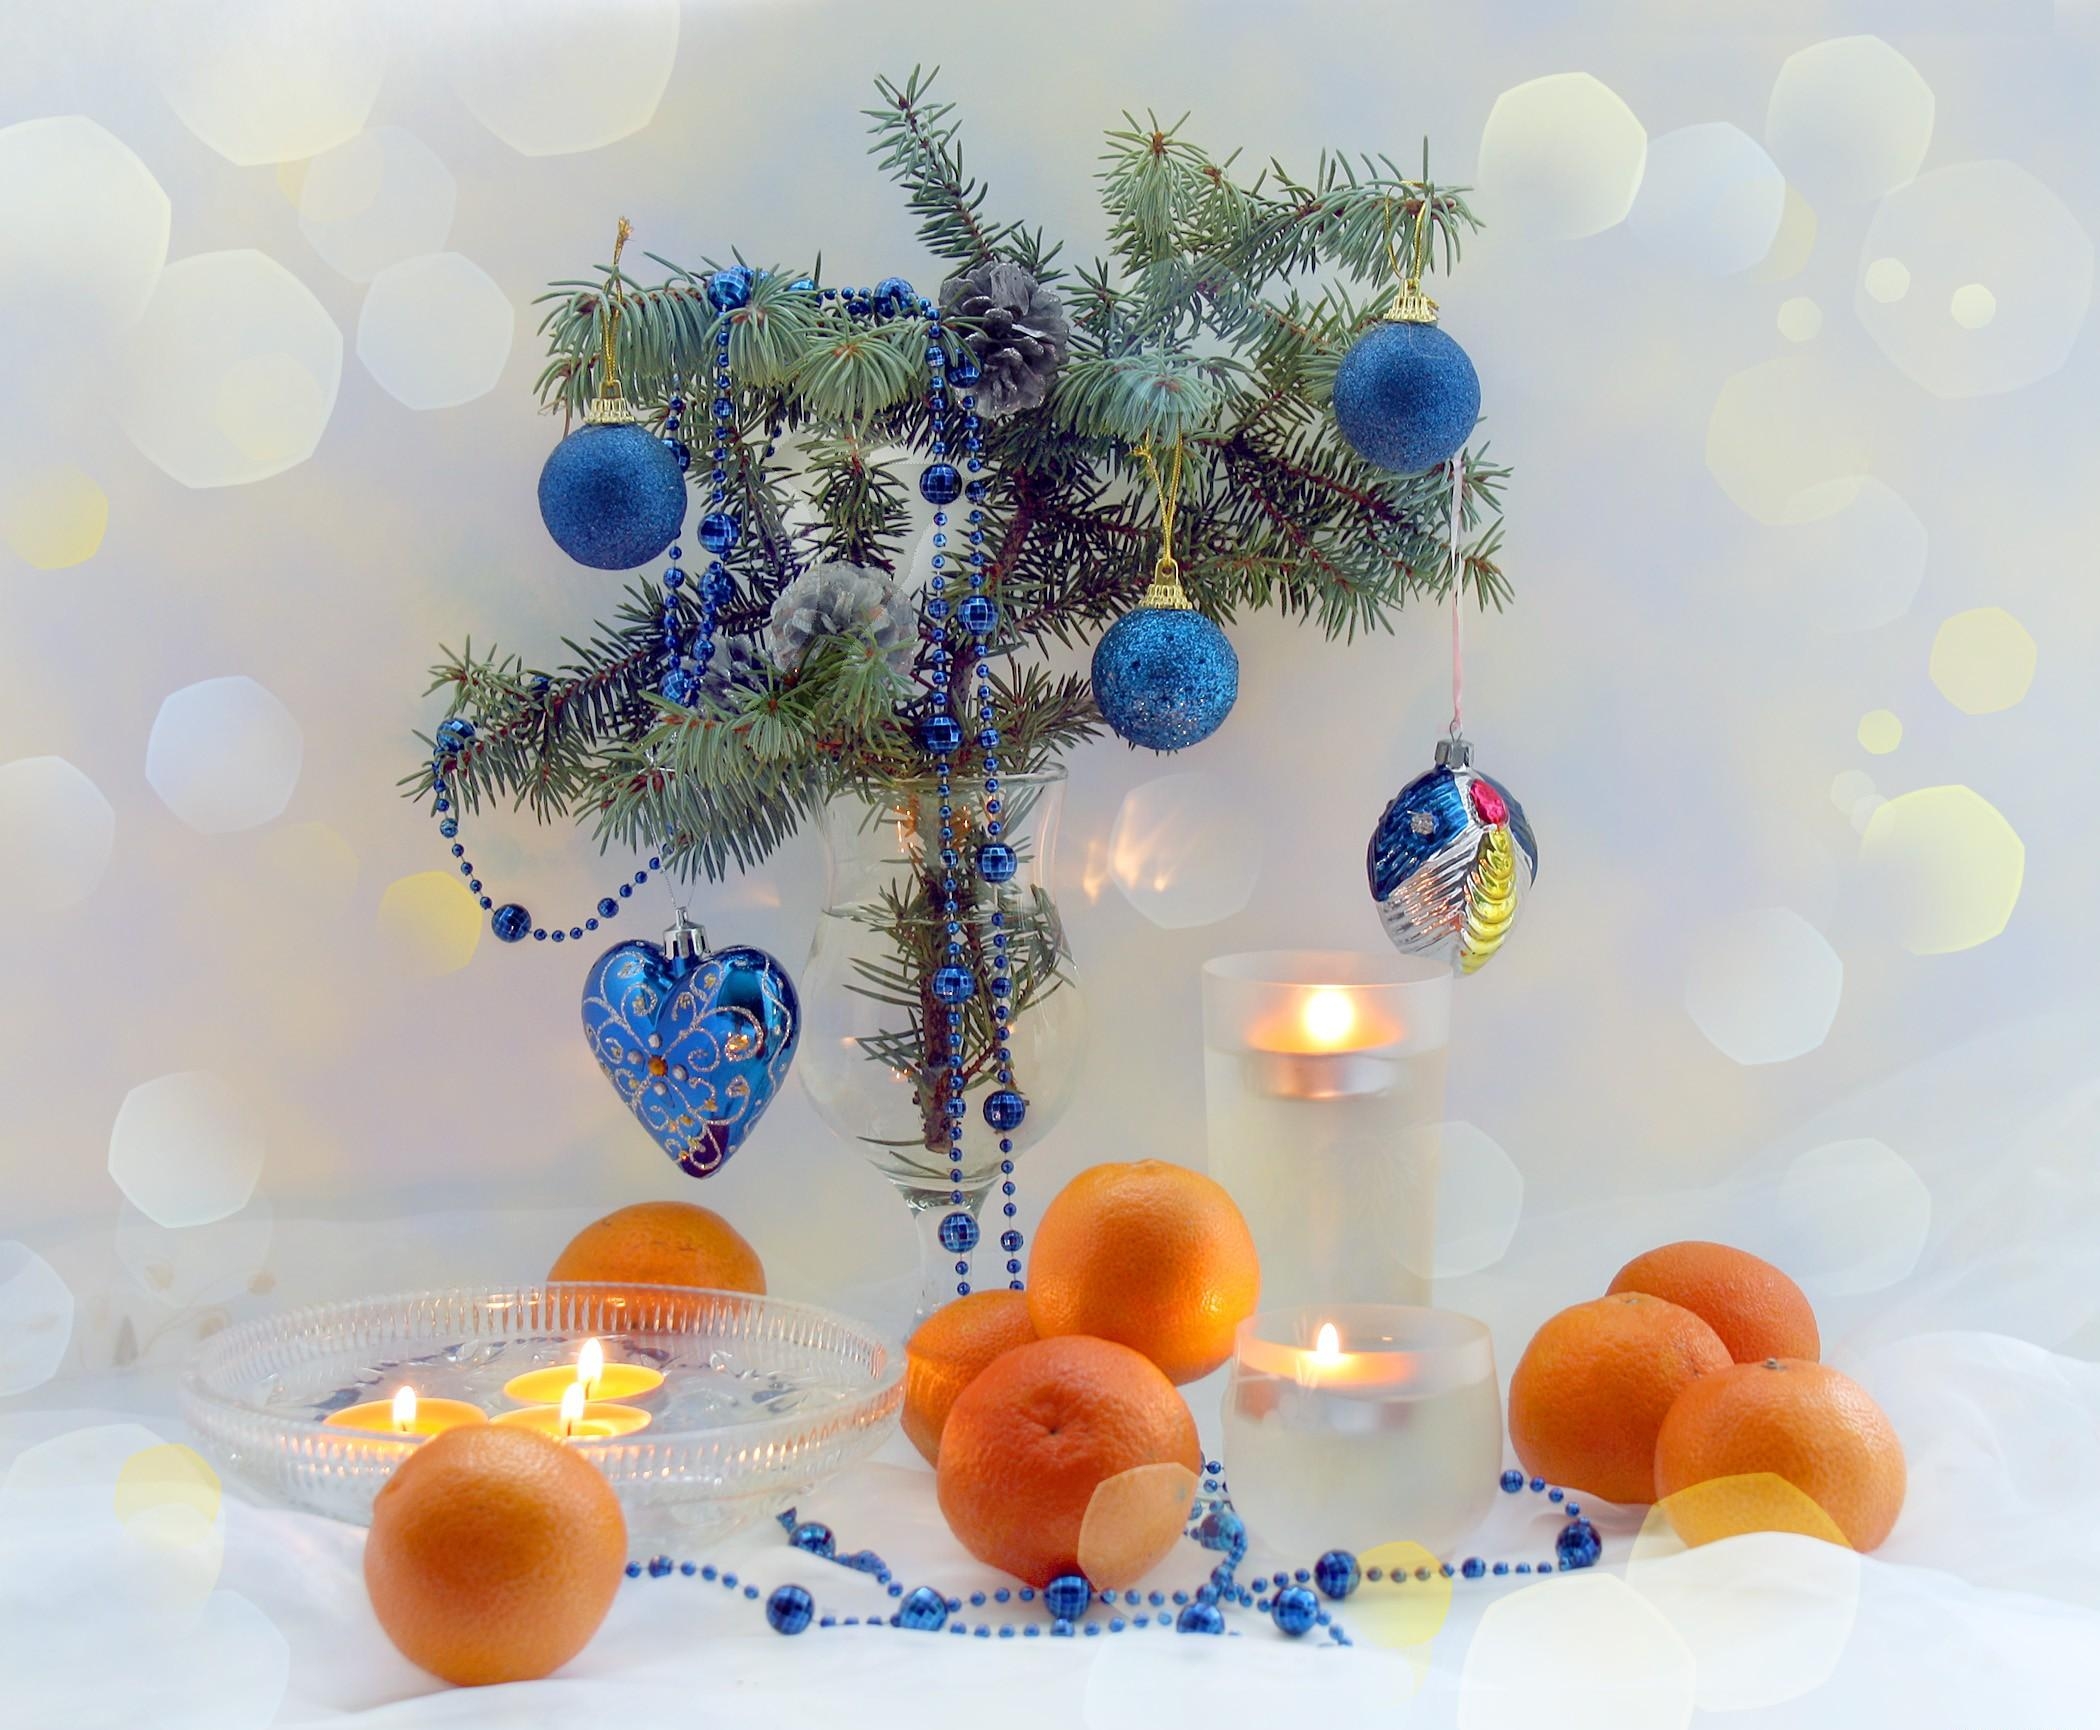 Windows Backgrounds holidays, new year, candles, tangerines, holiday, branch, christmas decorations, christmas tree toys